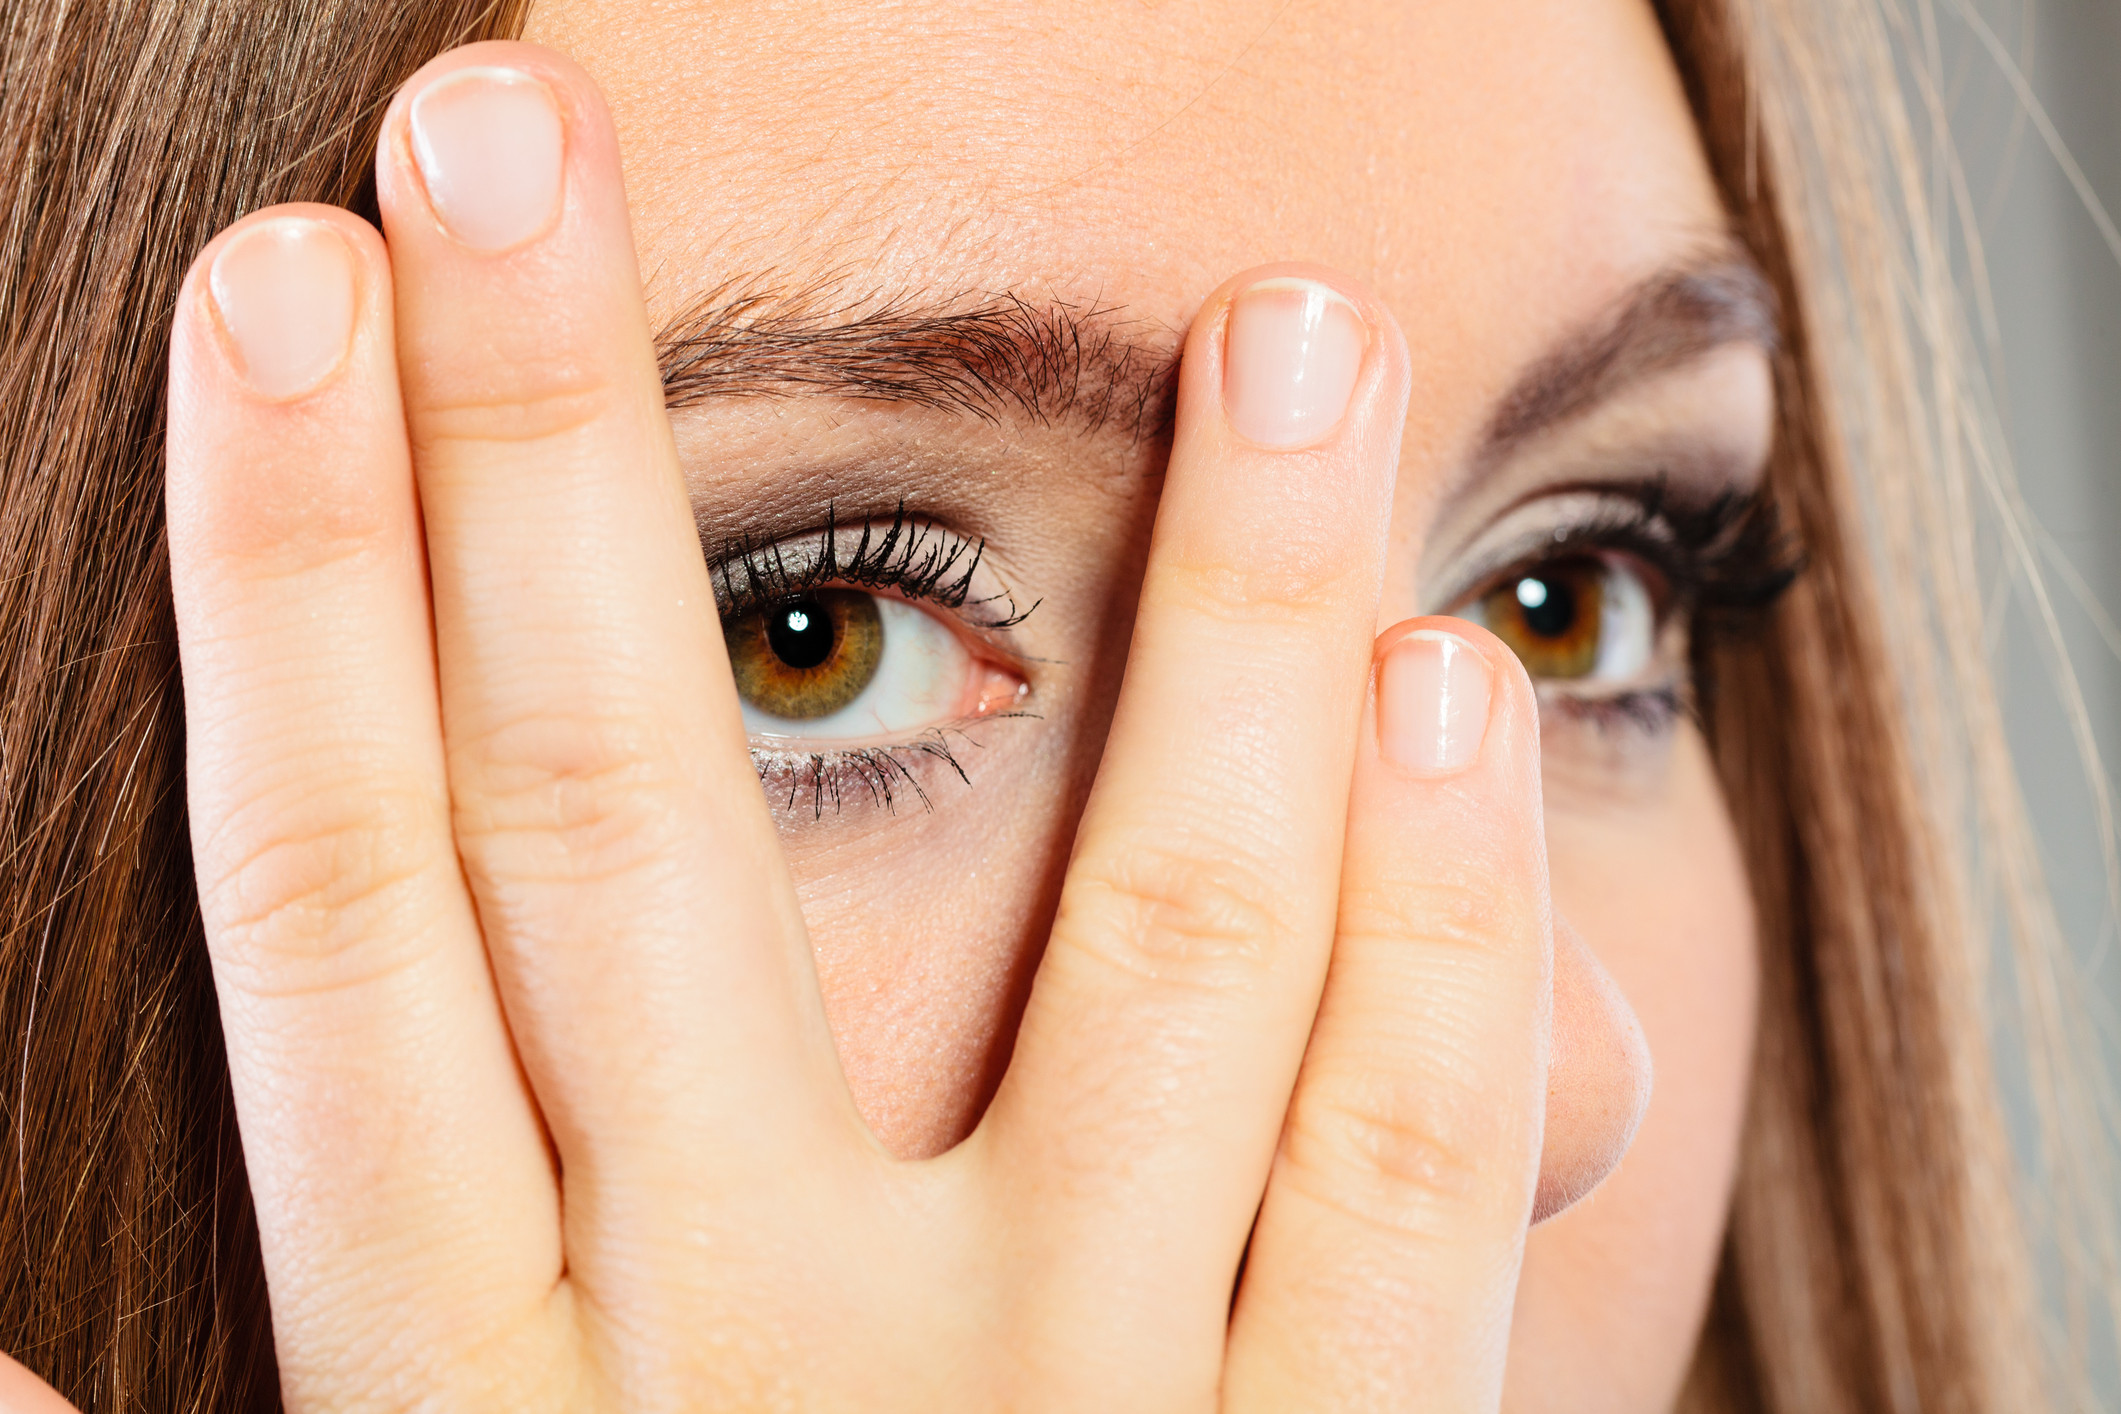 Image of an exhausted woman covering her eye bags with her hands.